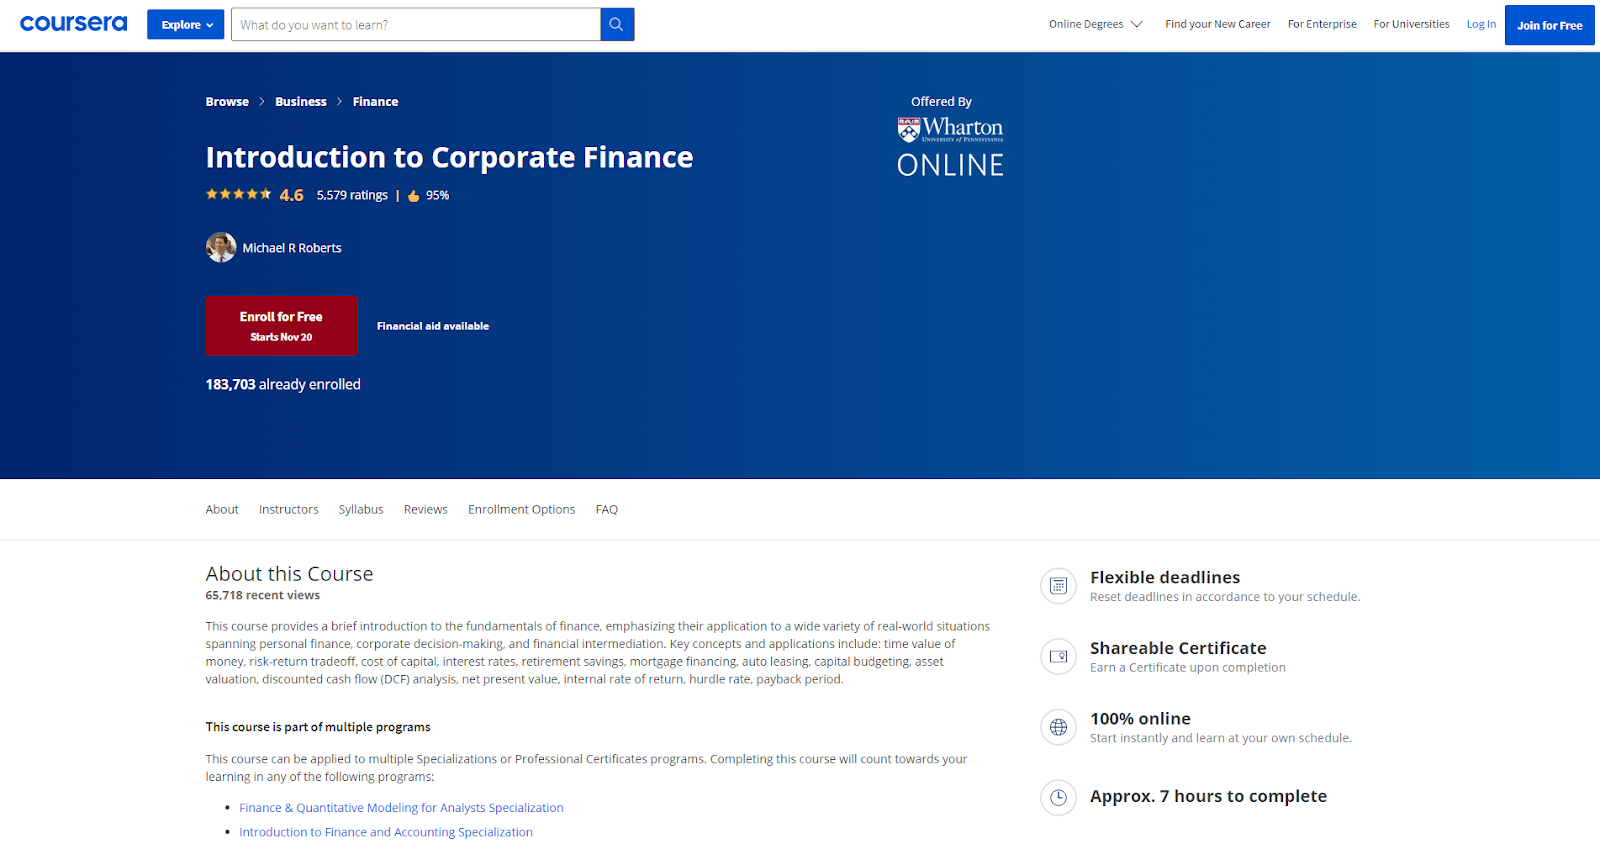 Introduction to Corporate Finance
